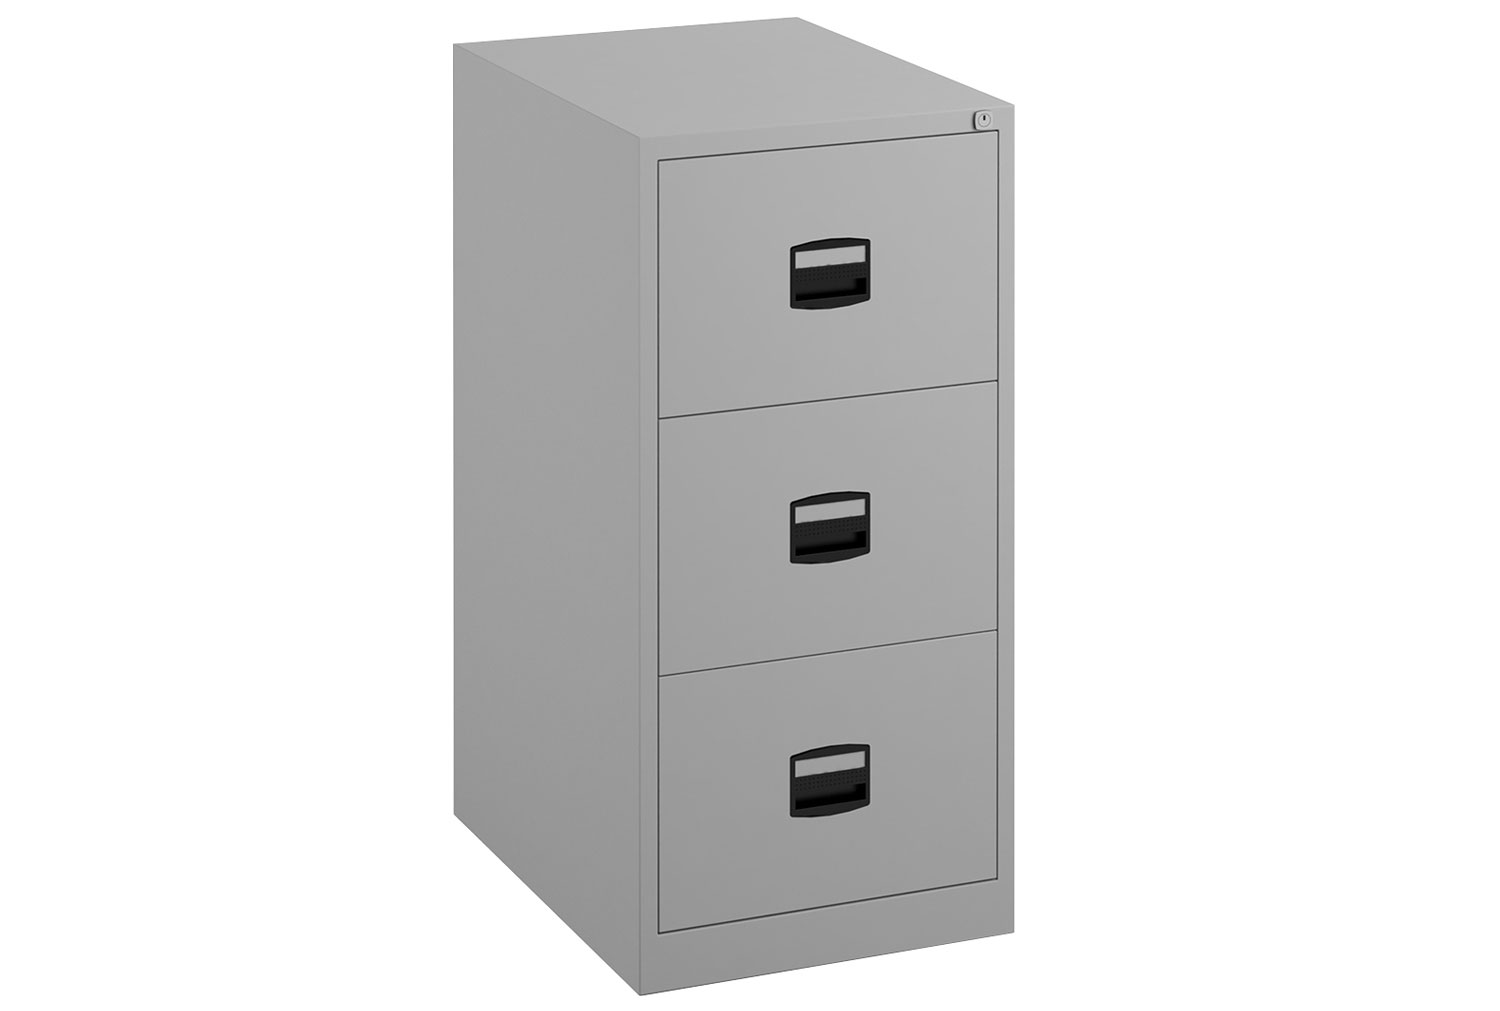 Bisley Economy Filing Cabinet (Central Handle), 3 Drawer - 47wx62dx102h (cm), Grey, Express Delivery